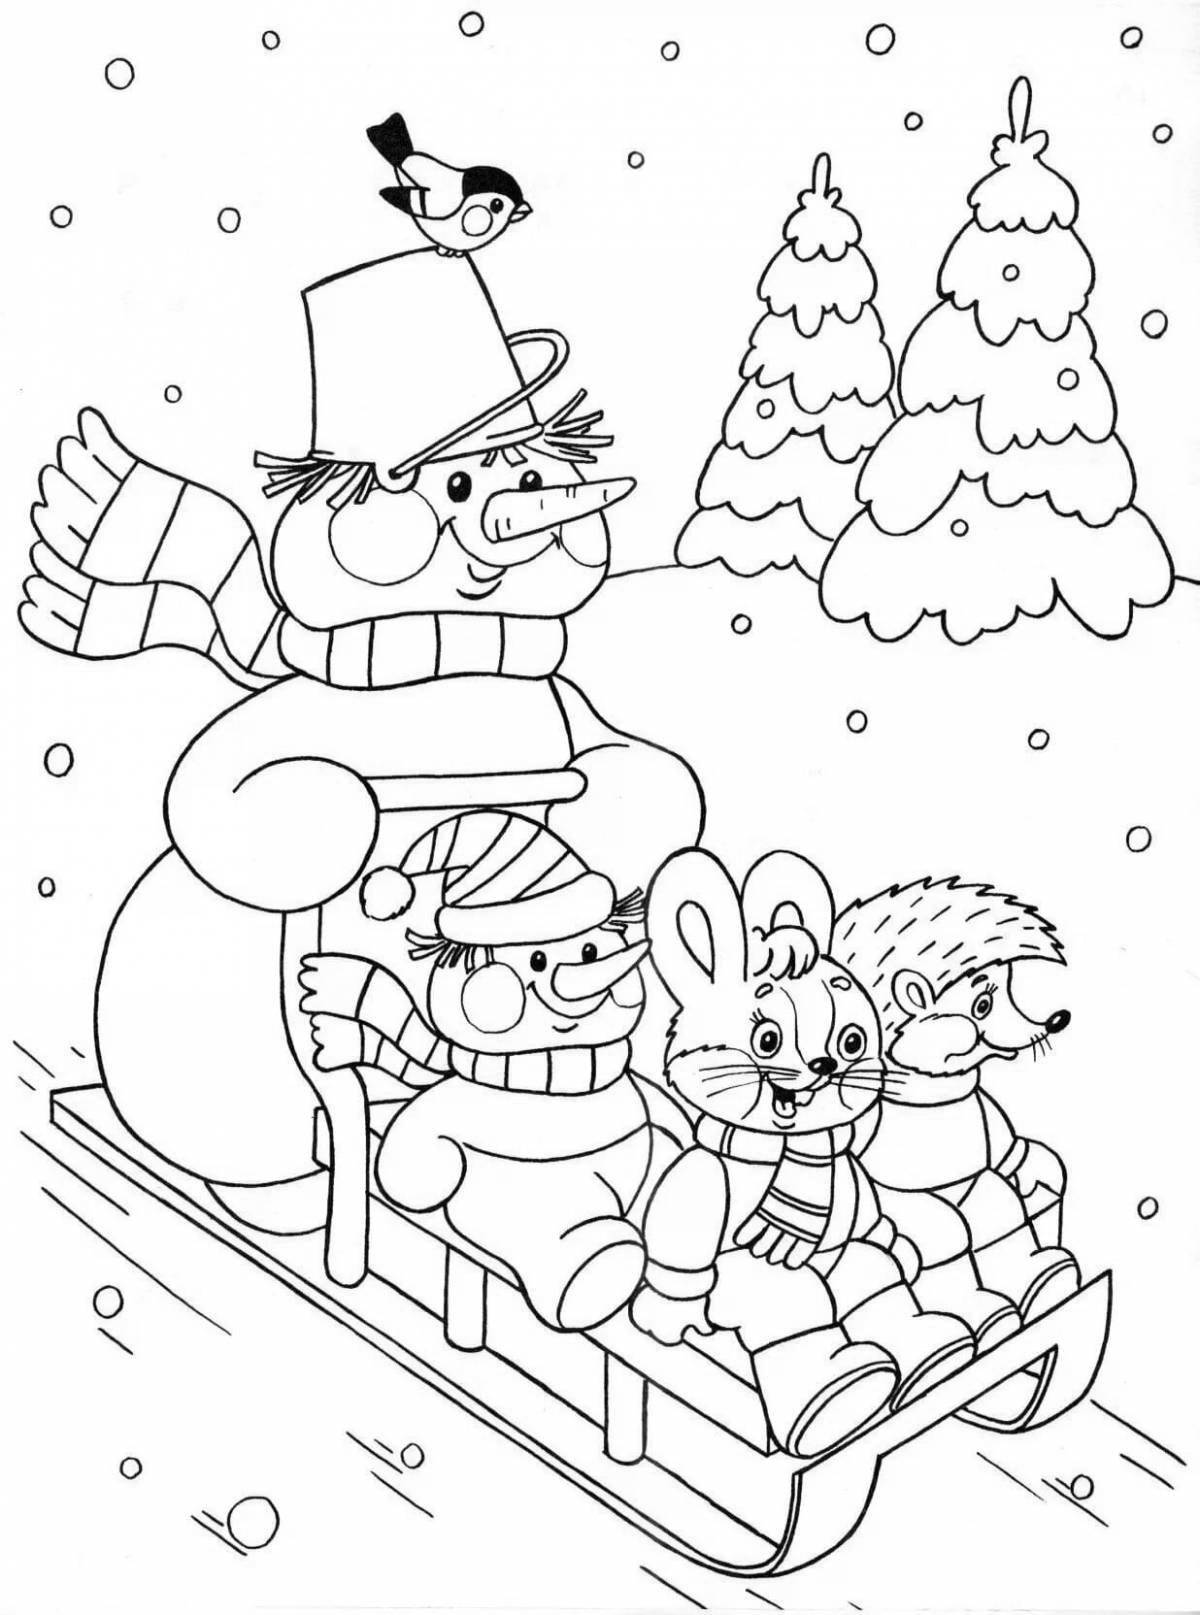 Glamorous winter coloring book for kids 6-7 years old